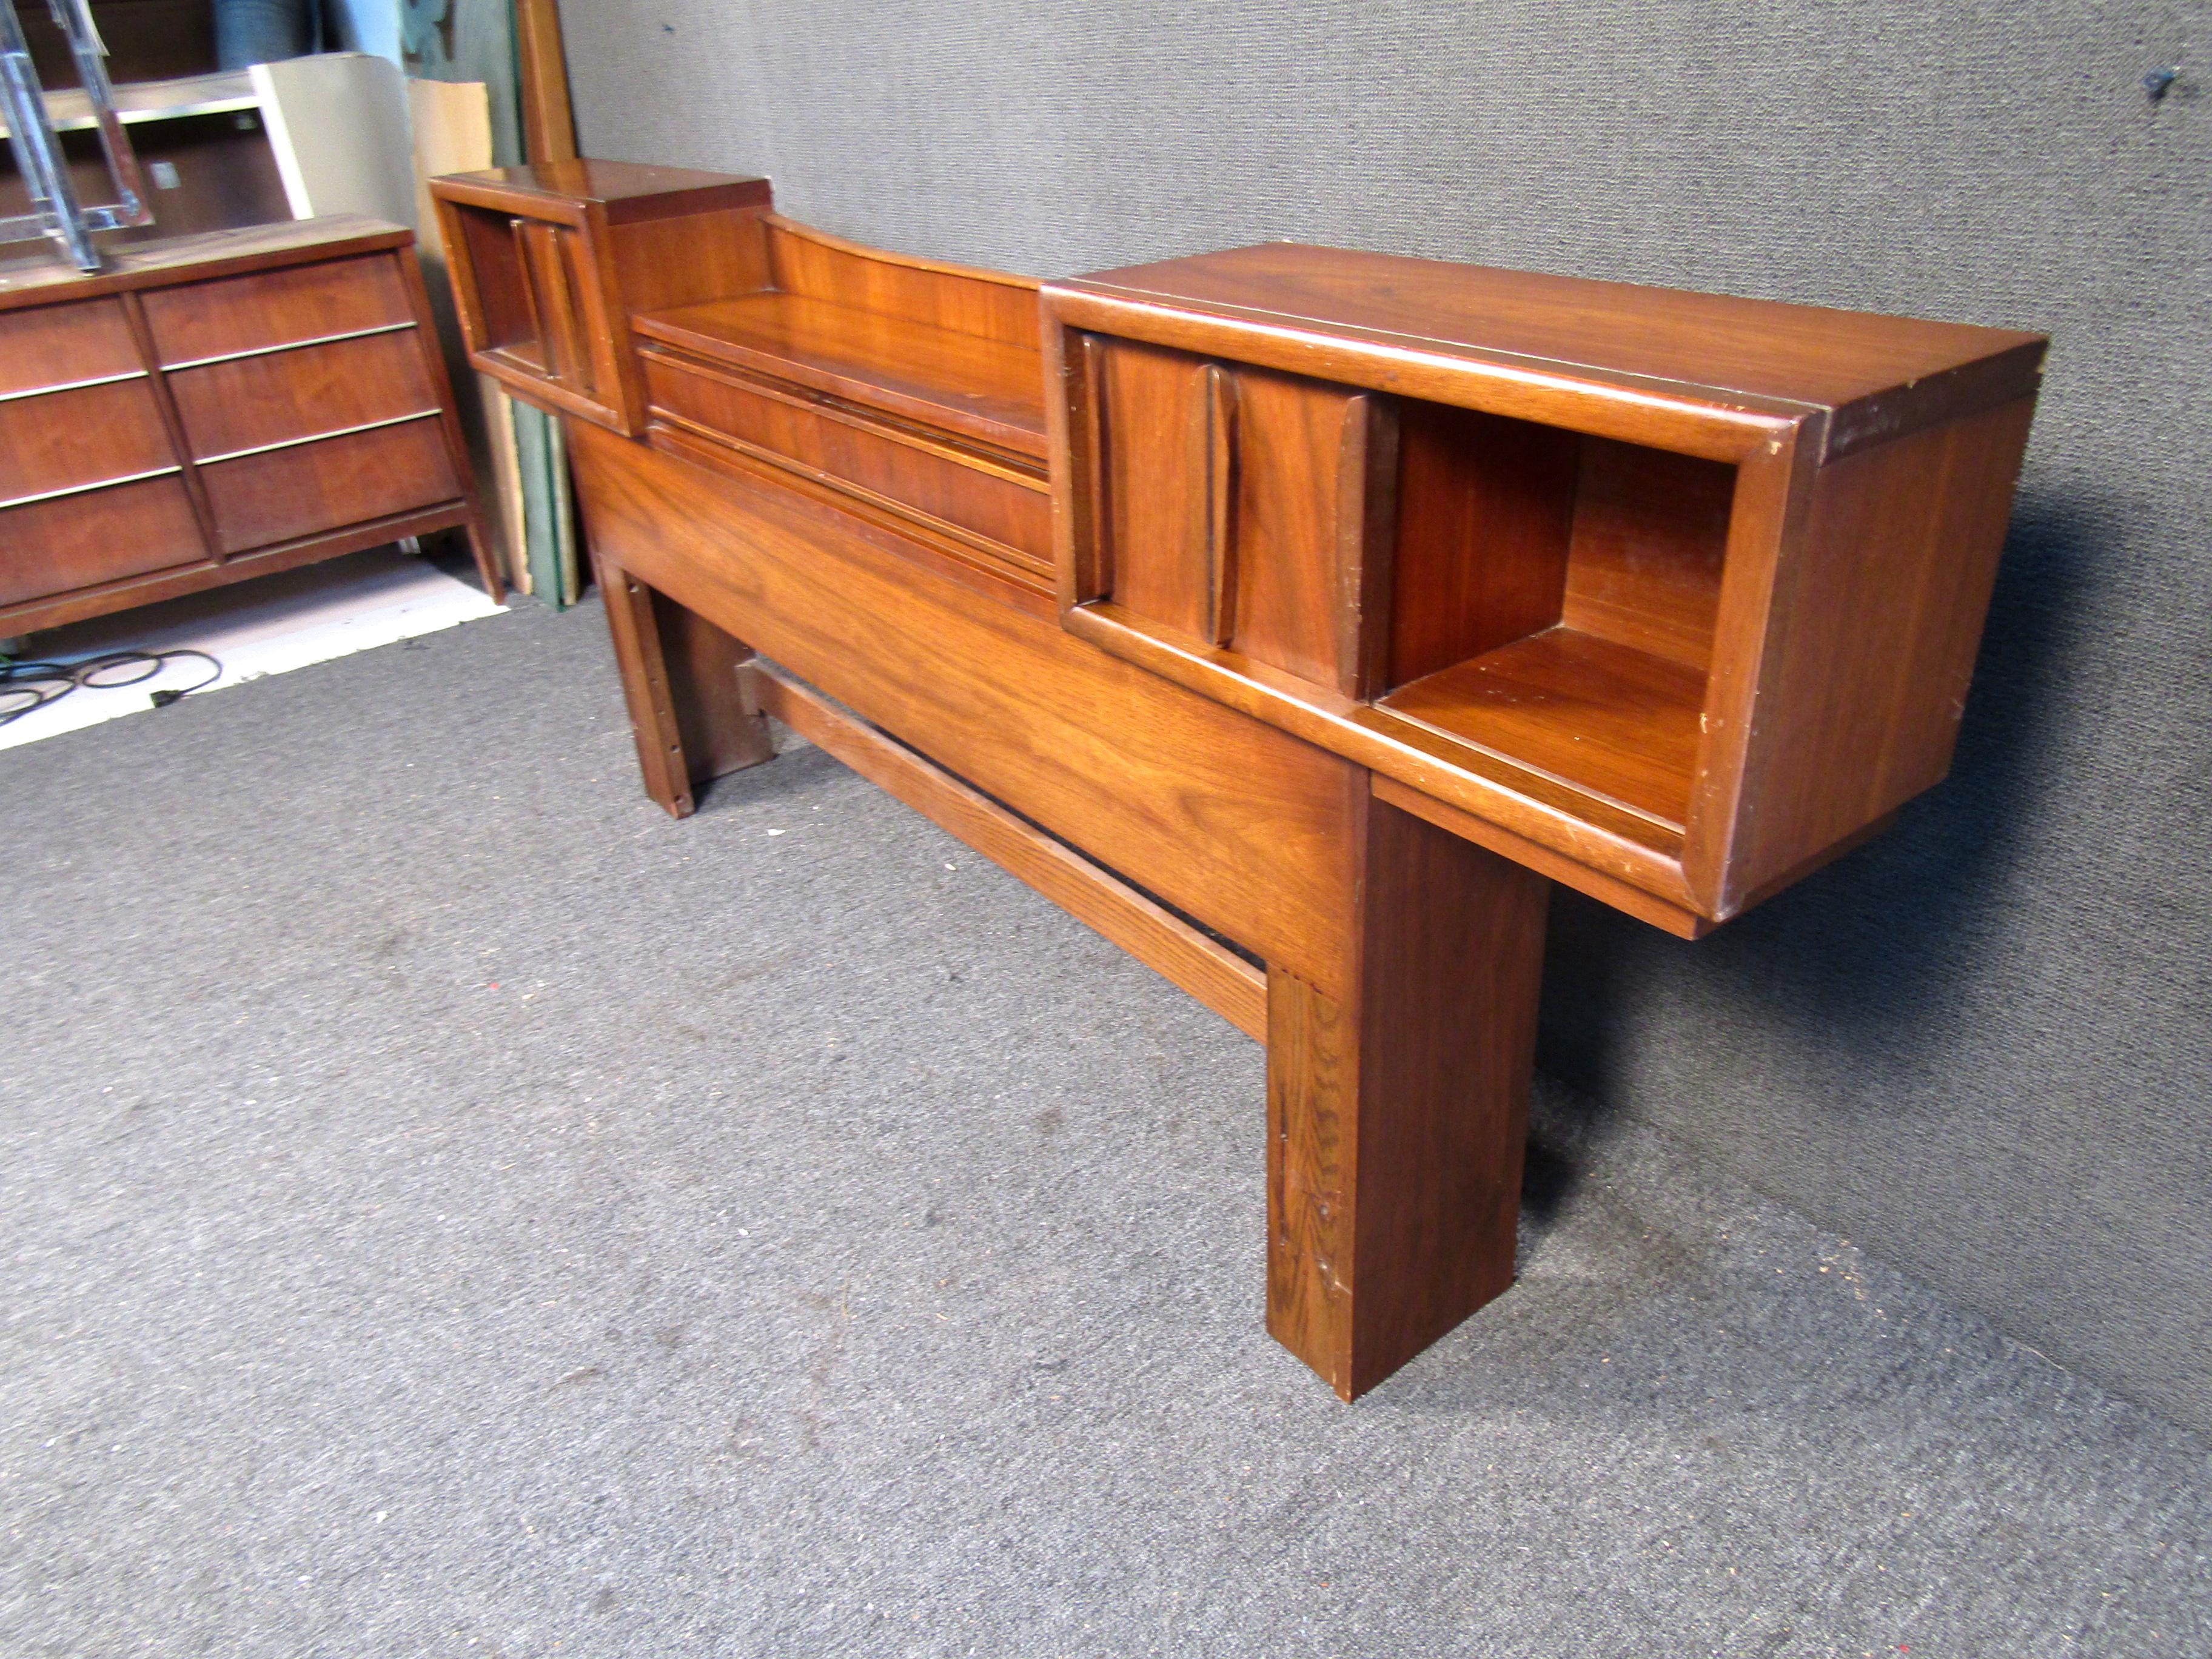 This headboard features rich walnut wood grain, two center drawers and two sliding door side cabinets. This vintage piece would be a perfect addition to any Mid Century bedroom.

*This headboard does not include rails or foot board*

Please